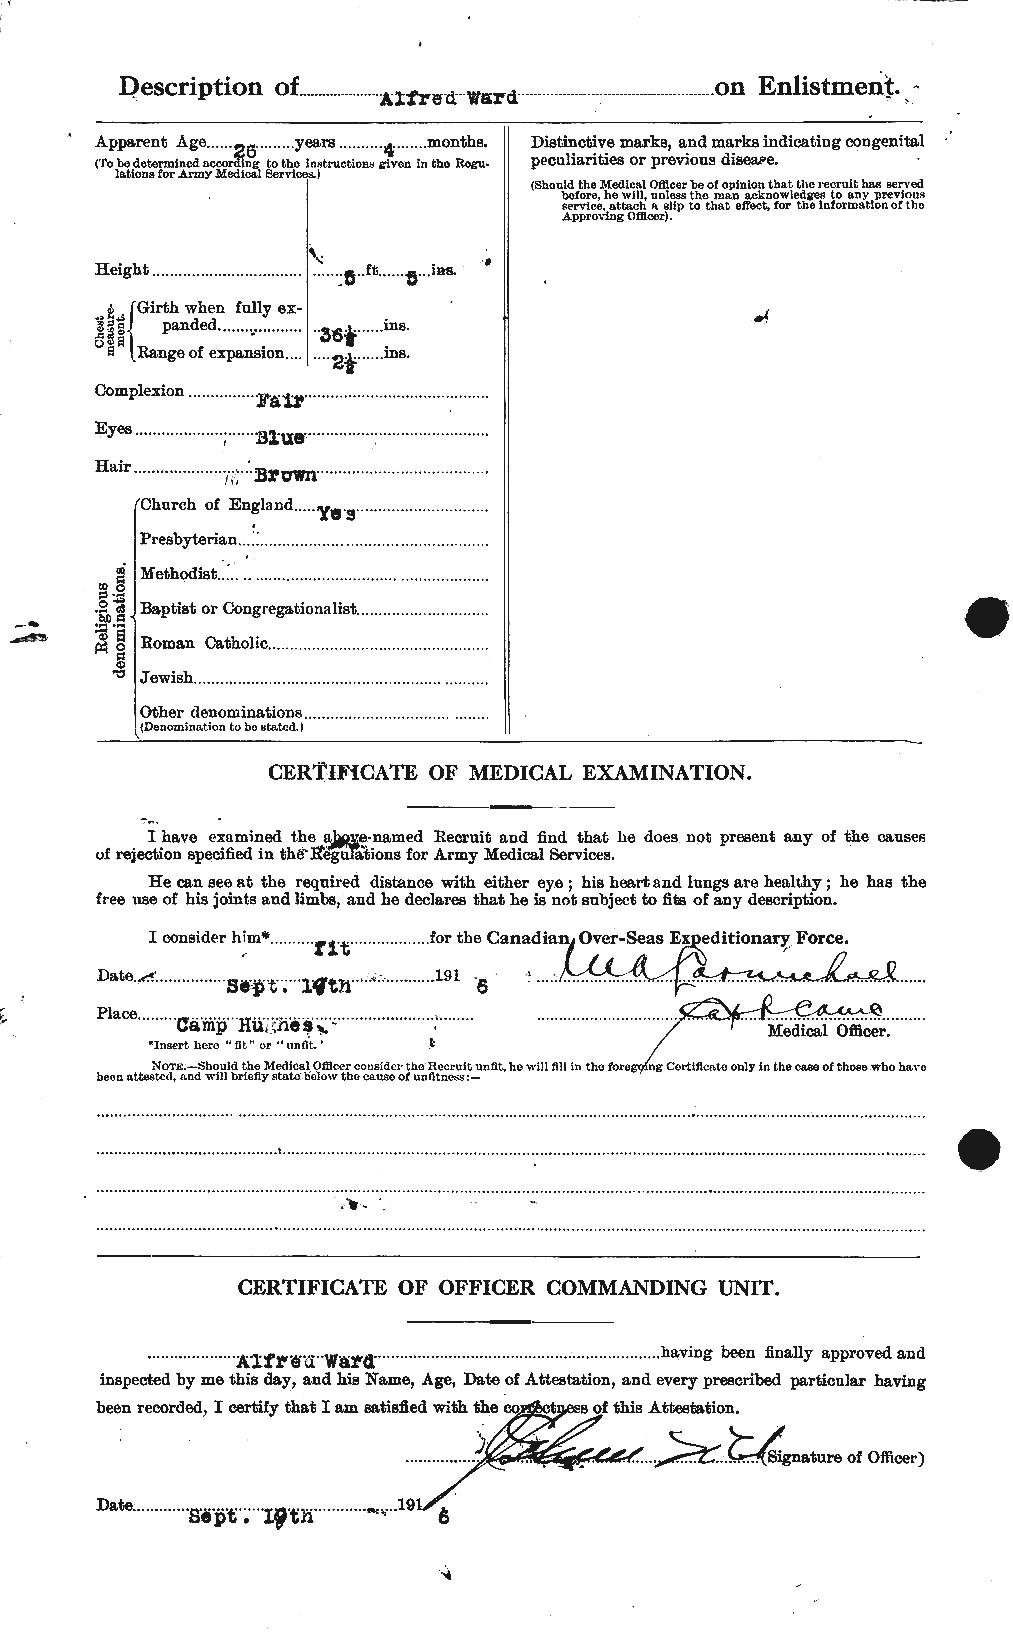 Personnel Records of the First World War - CEF 655111b